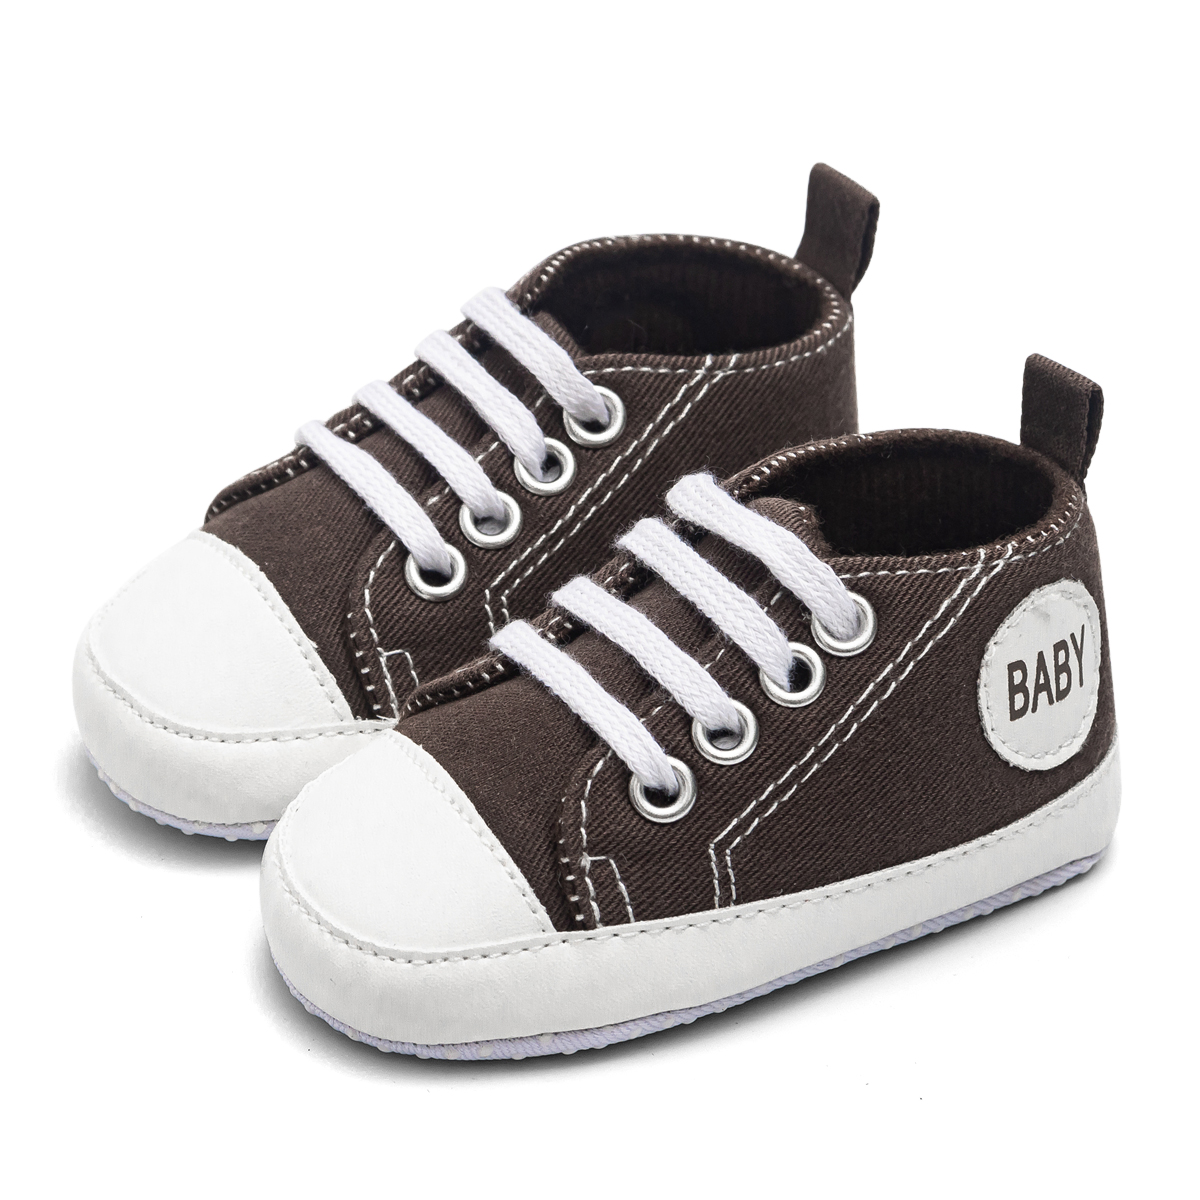 Baby / Toddler BABY Print Stylish Casual Canvas Shoes